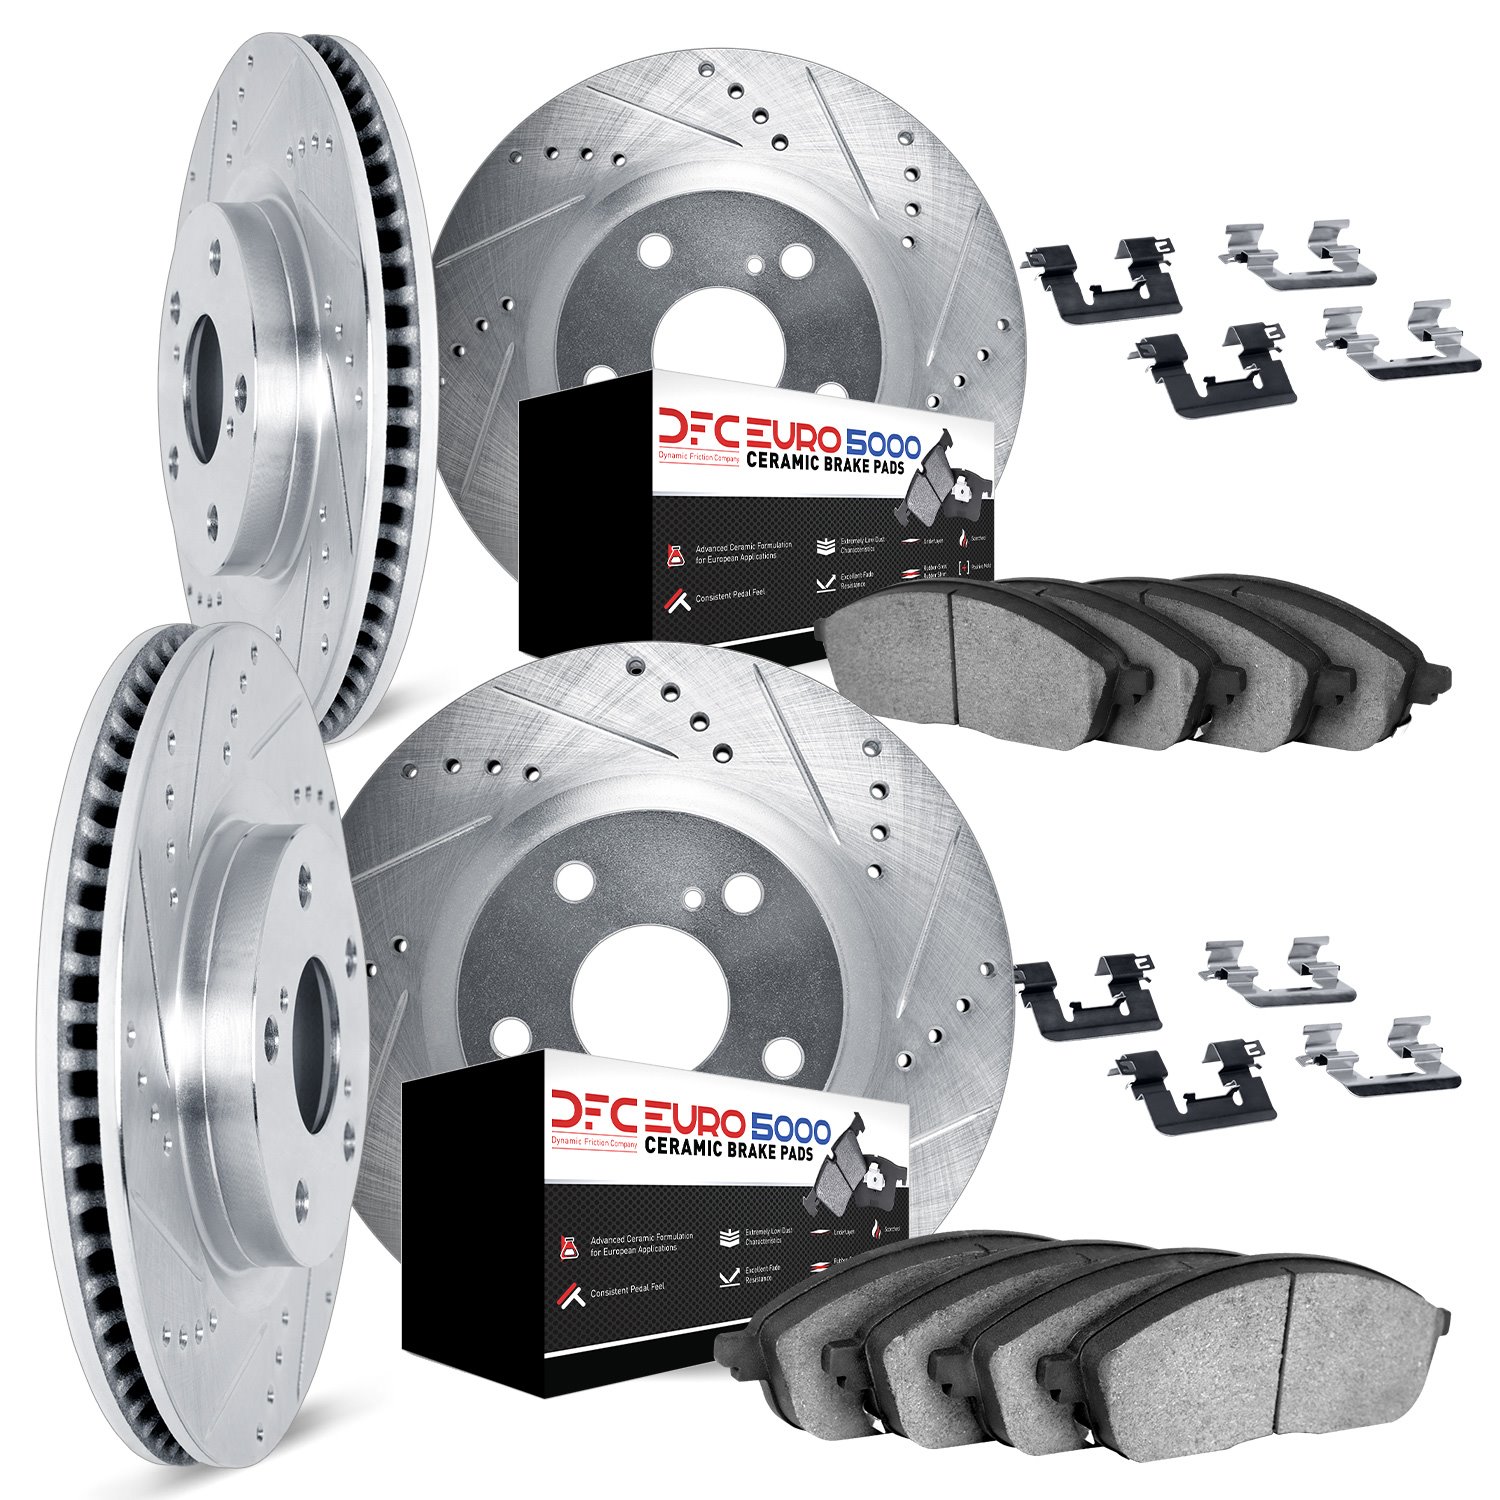 7614-39000 Drilled/Slotted Brake Rotors w/5000 Euro Ceramic Brake Pads Kit & Hardware [Silver], Fits Select Mopar, Position: Fro